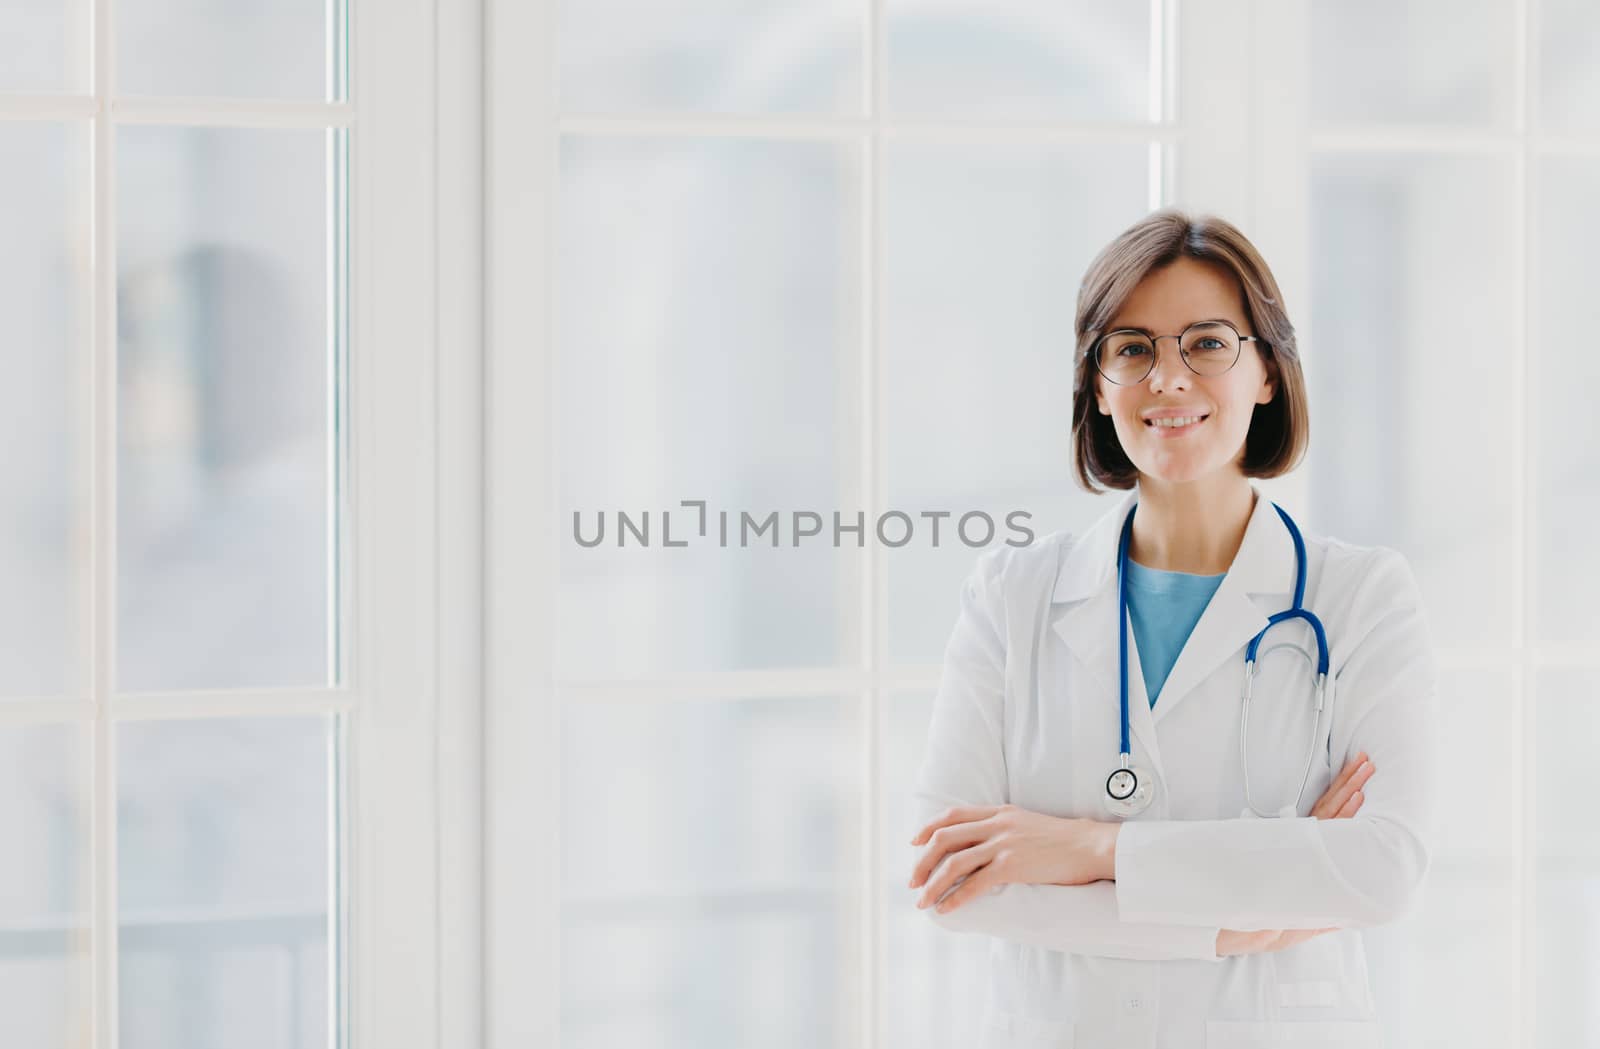 Self confident professional doctor stands with arms crossed, wears white medical gown with stethoscope, thinks about work positively, poses against big window. Healthcare and occupation concept by vkstock